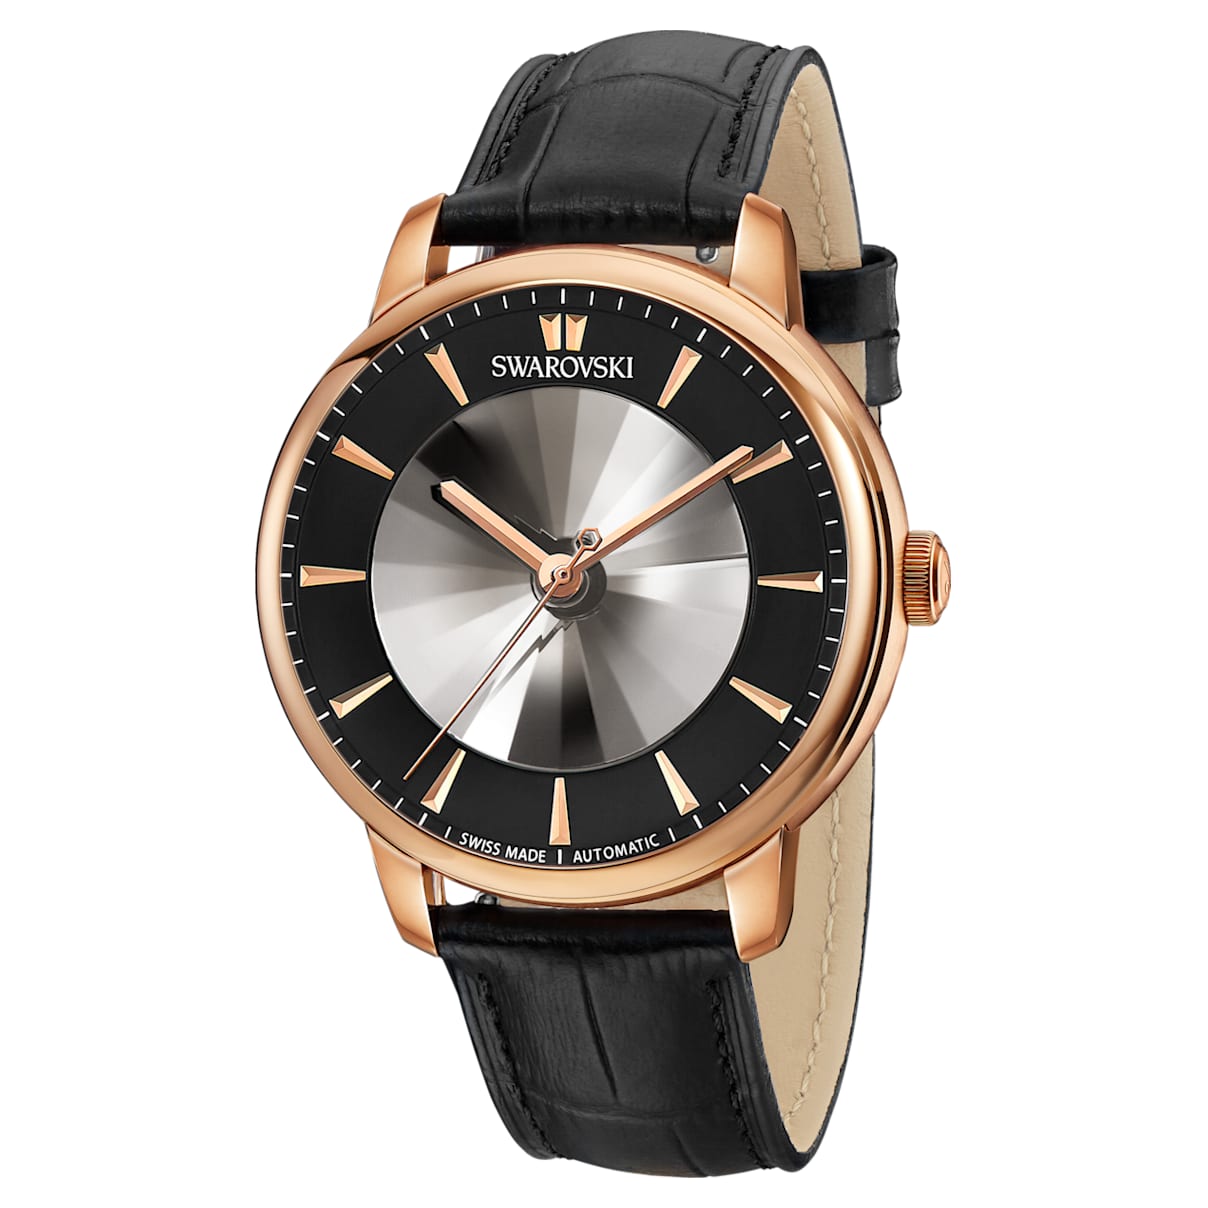 Atlantis Limited Edition Automatic Men's Watch, Leather strap, Black, Rose-gold tone PVD